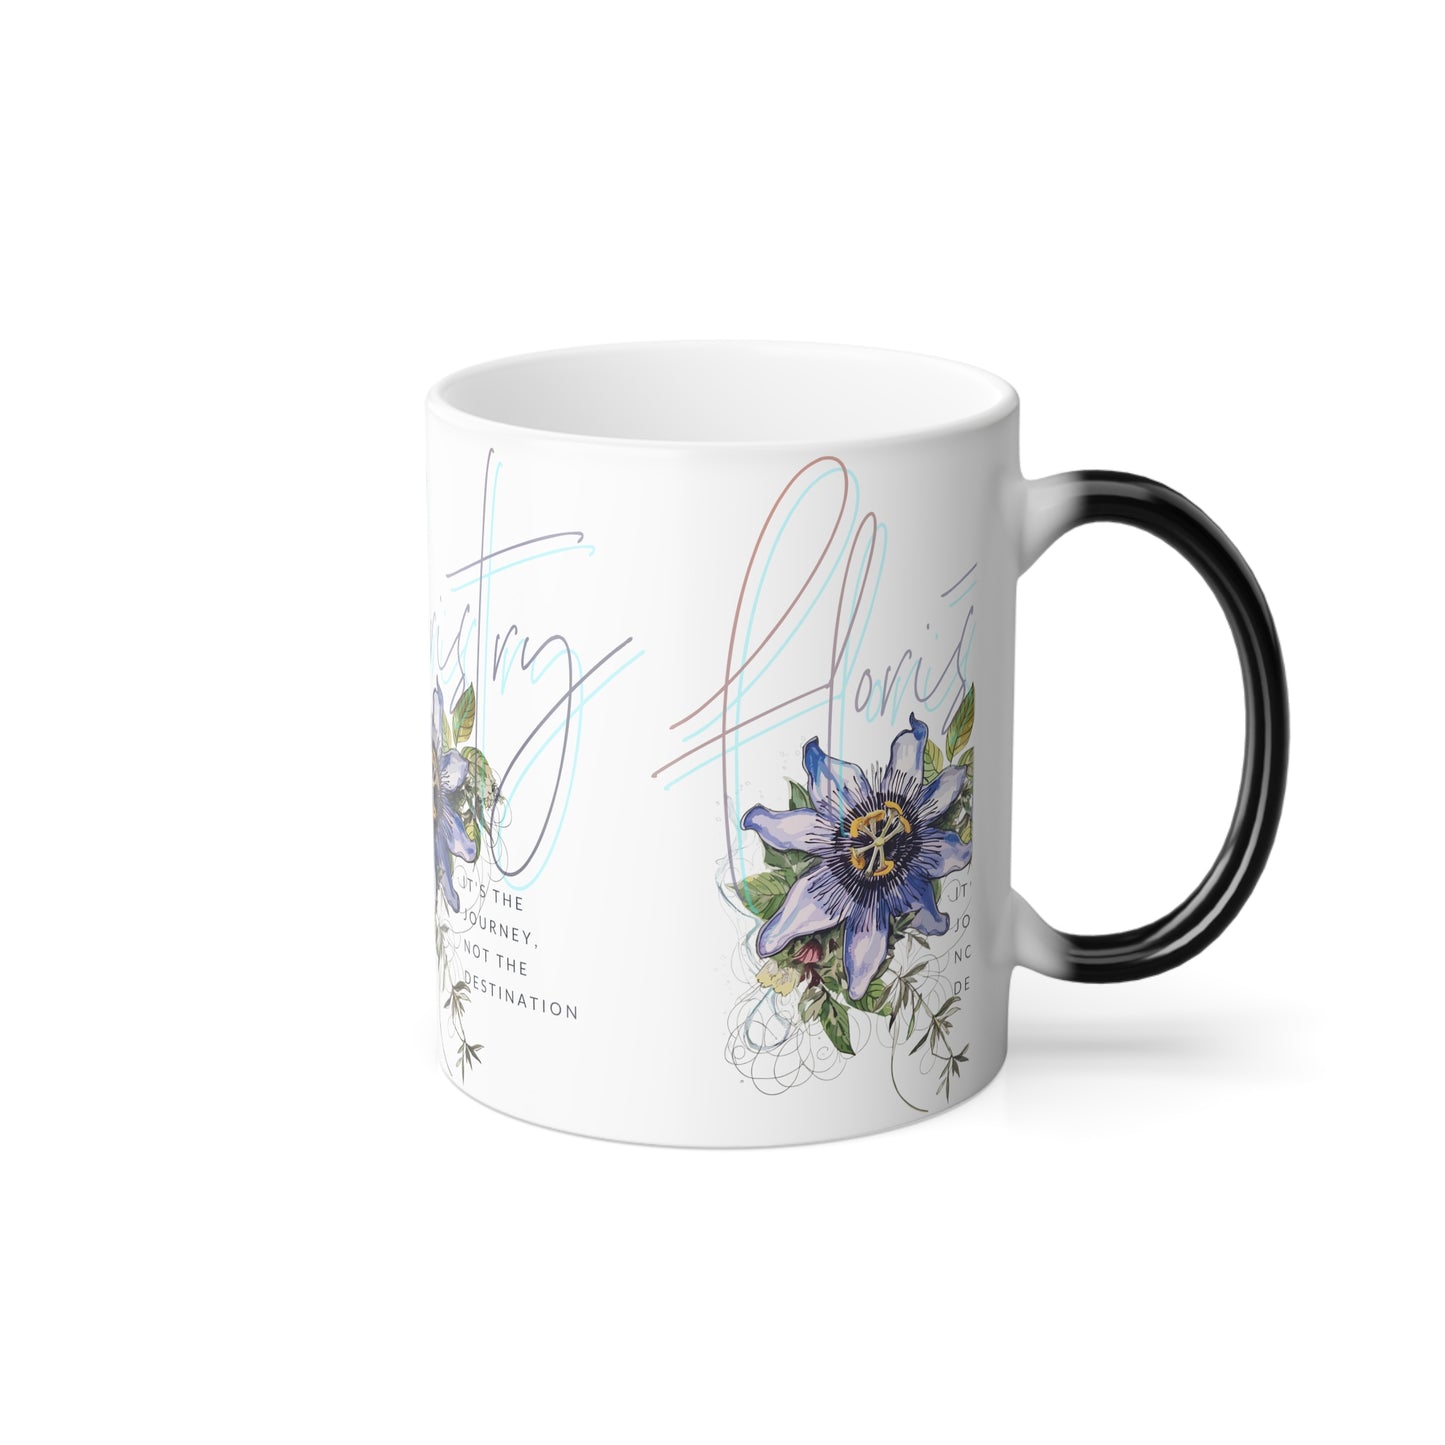 floristry is the journey color morphing mug, 11oz